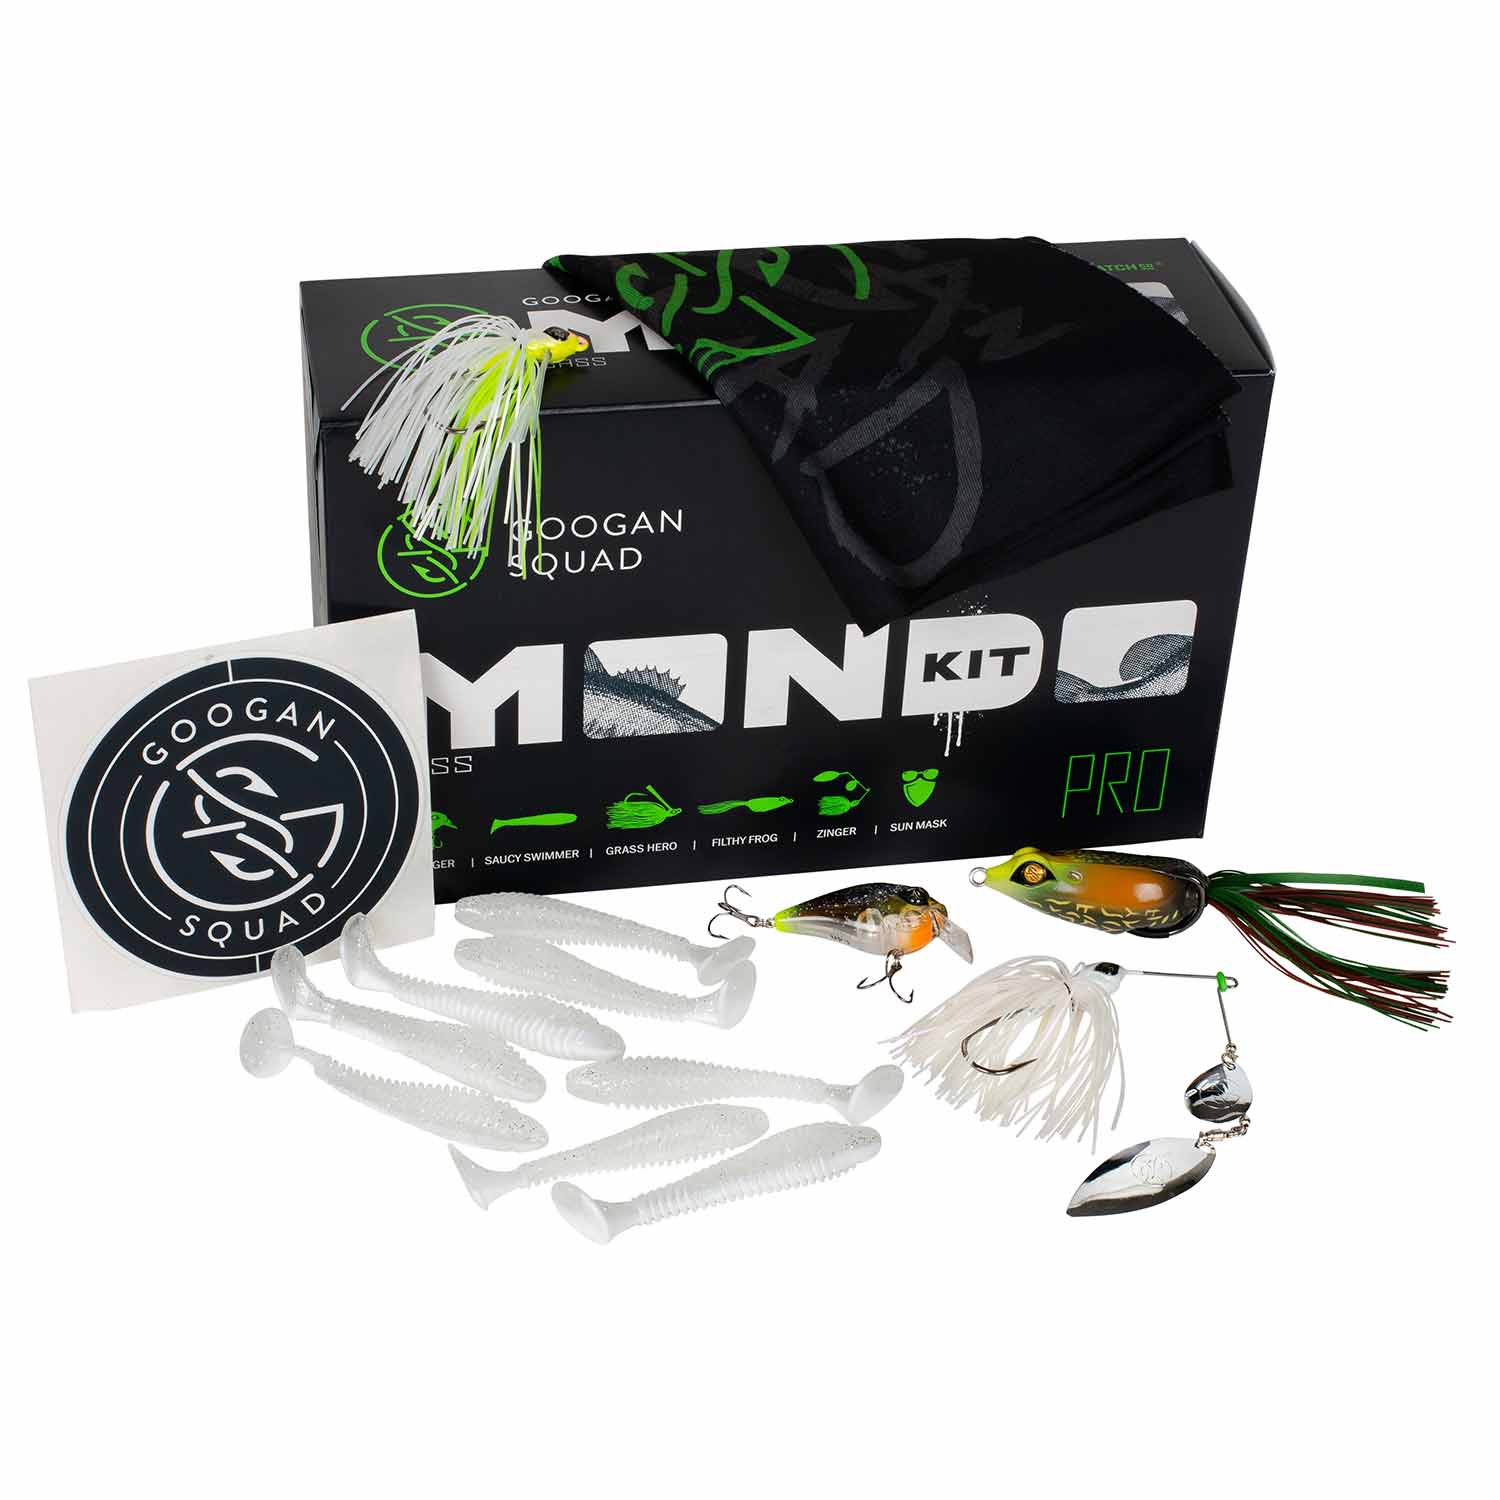 Googan Squad MONDO KIT?? UNBOXING AND GIVEAWAY!! 2020 